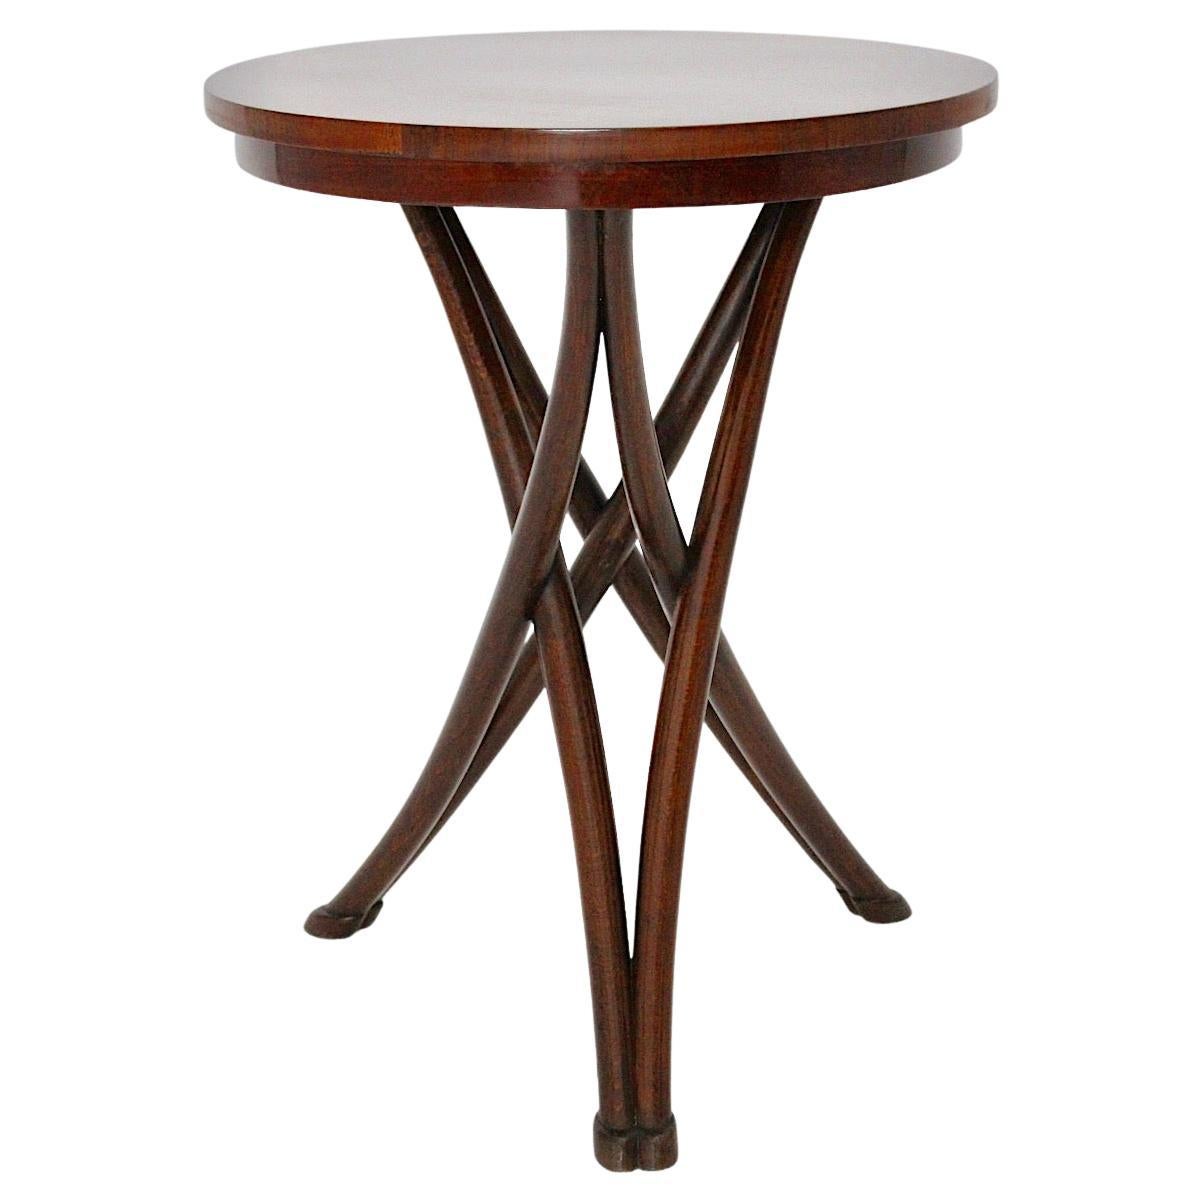 Historicism Beech Bentwood Side Table No 13 by August Thonet circa 1880 Vienna For Sale